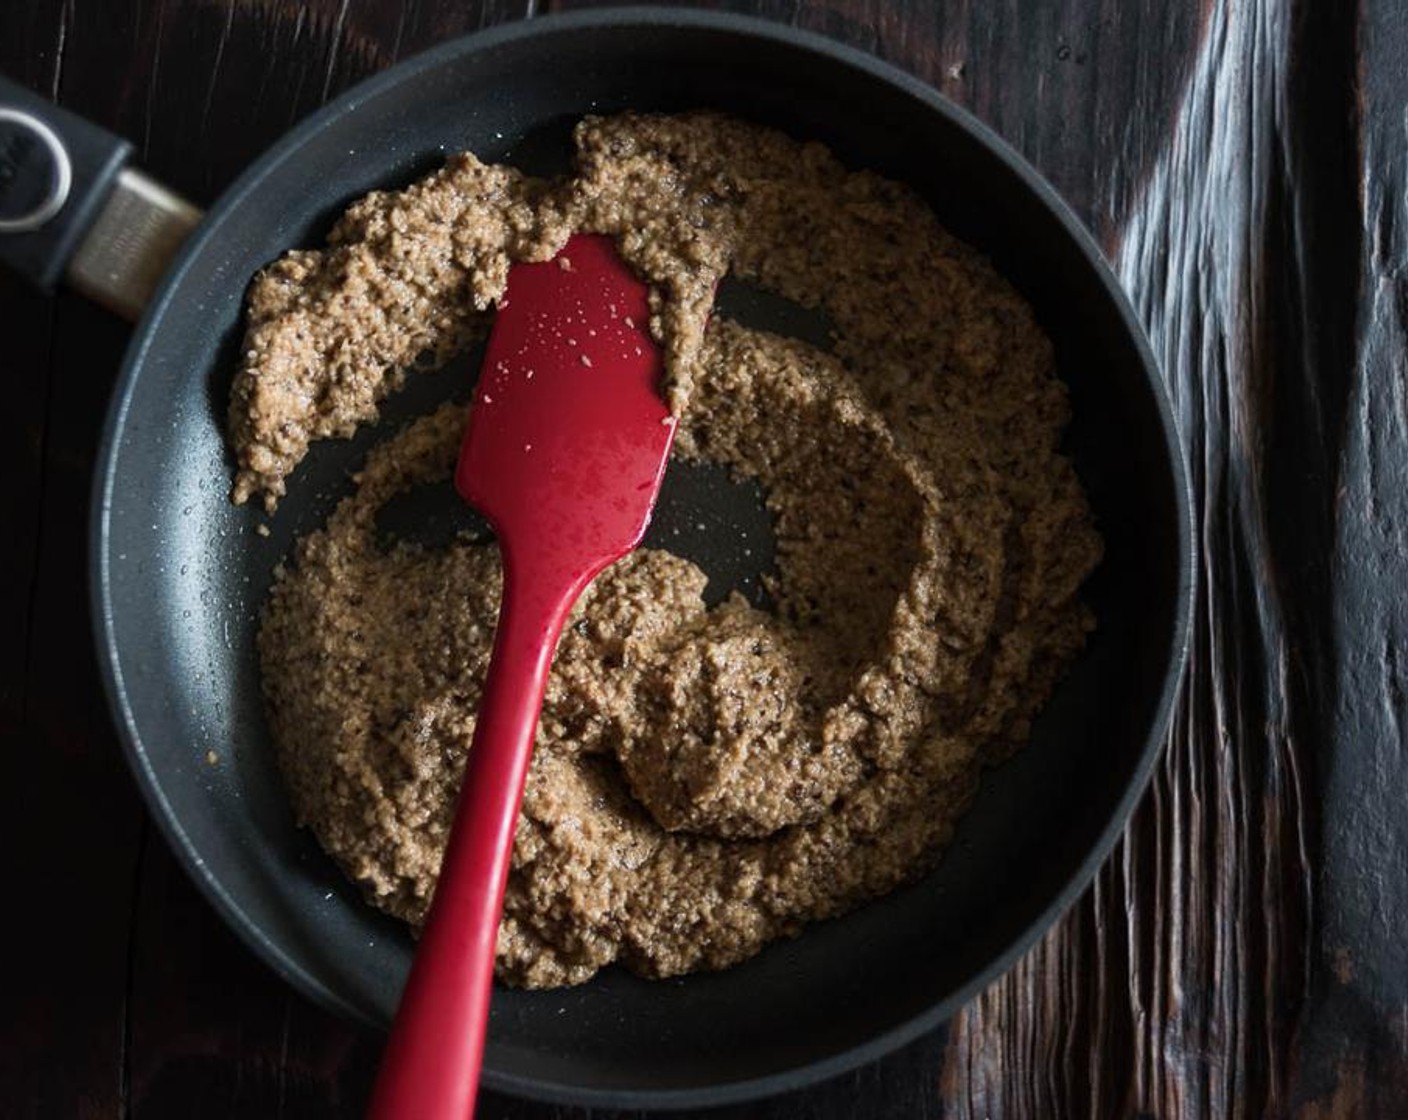 step 6 Add Light Soy Sauce (1 Tbsp), Dark Soy Sauce (1 Tbsp), Miso Paste (1/2 Tbsp), Agave Syrup (1 tsp) and Chinese Five Spice Powder (1/4 tsp) in a small bowl. Whisk until the miso paste has dissolved completely. Pour into the frying pan and stir to mix well.